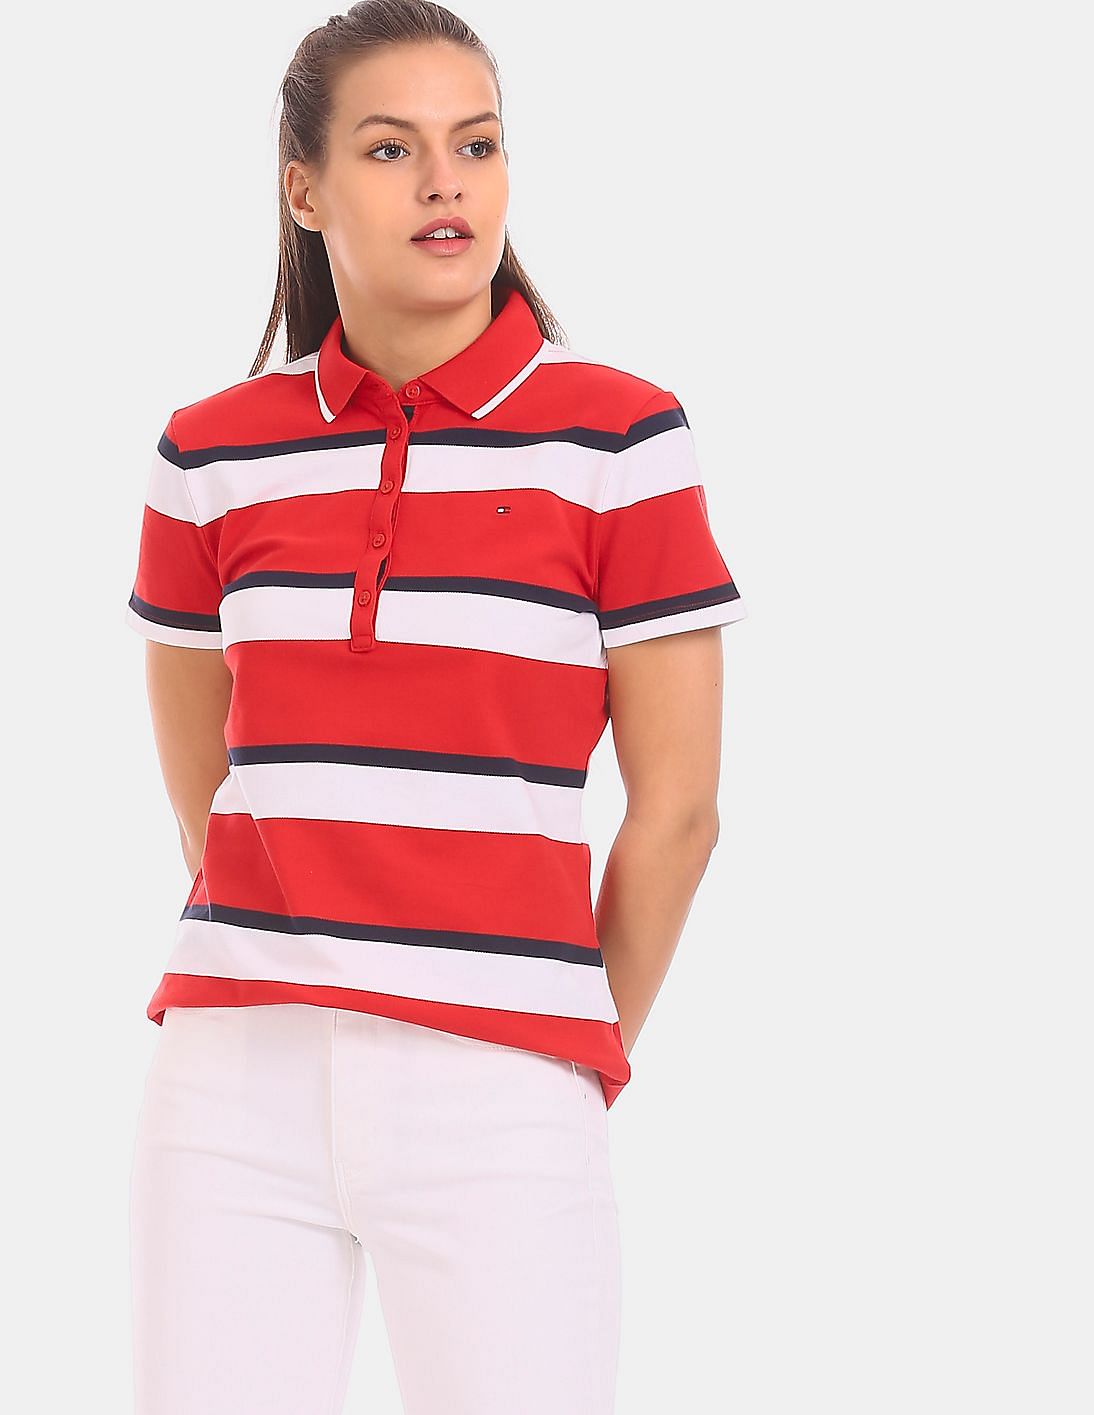 red and white striped polo shirt womens